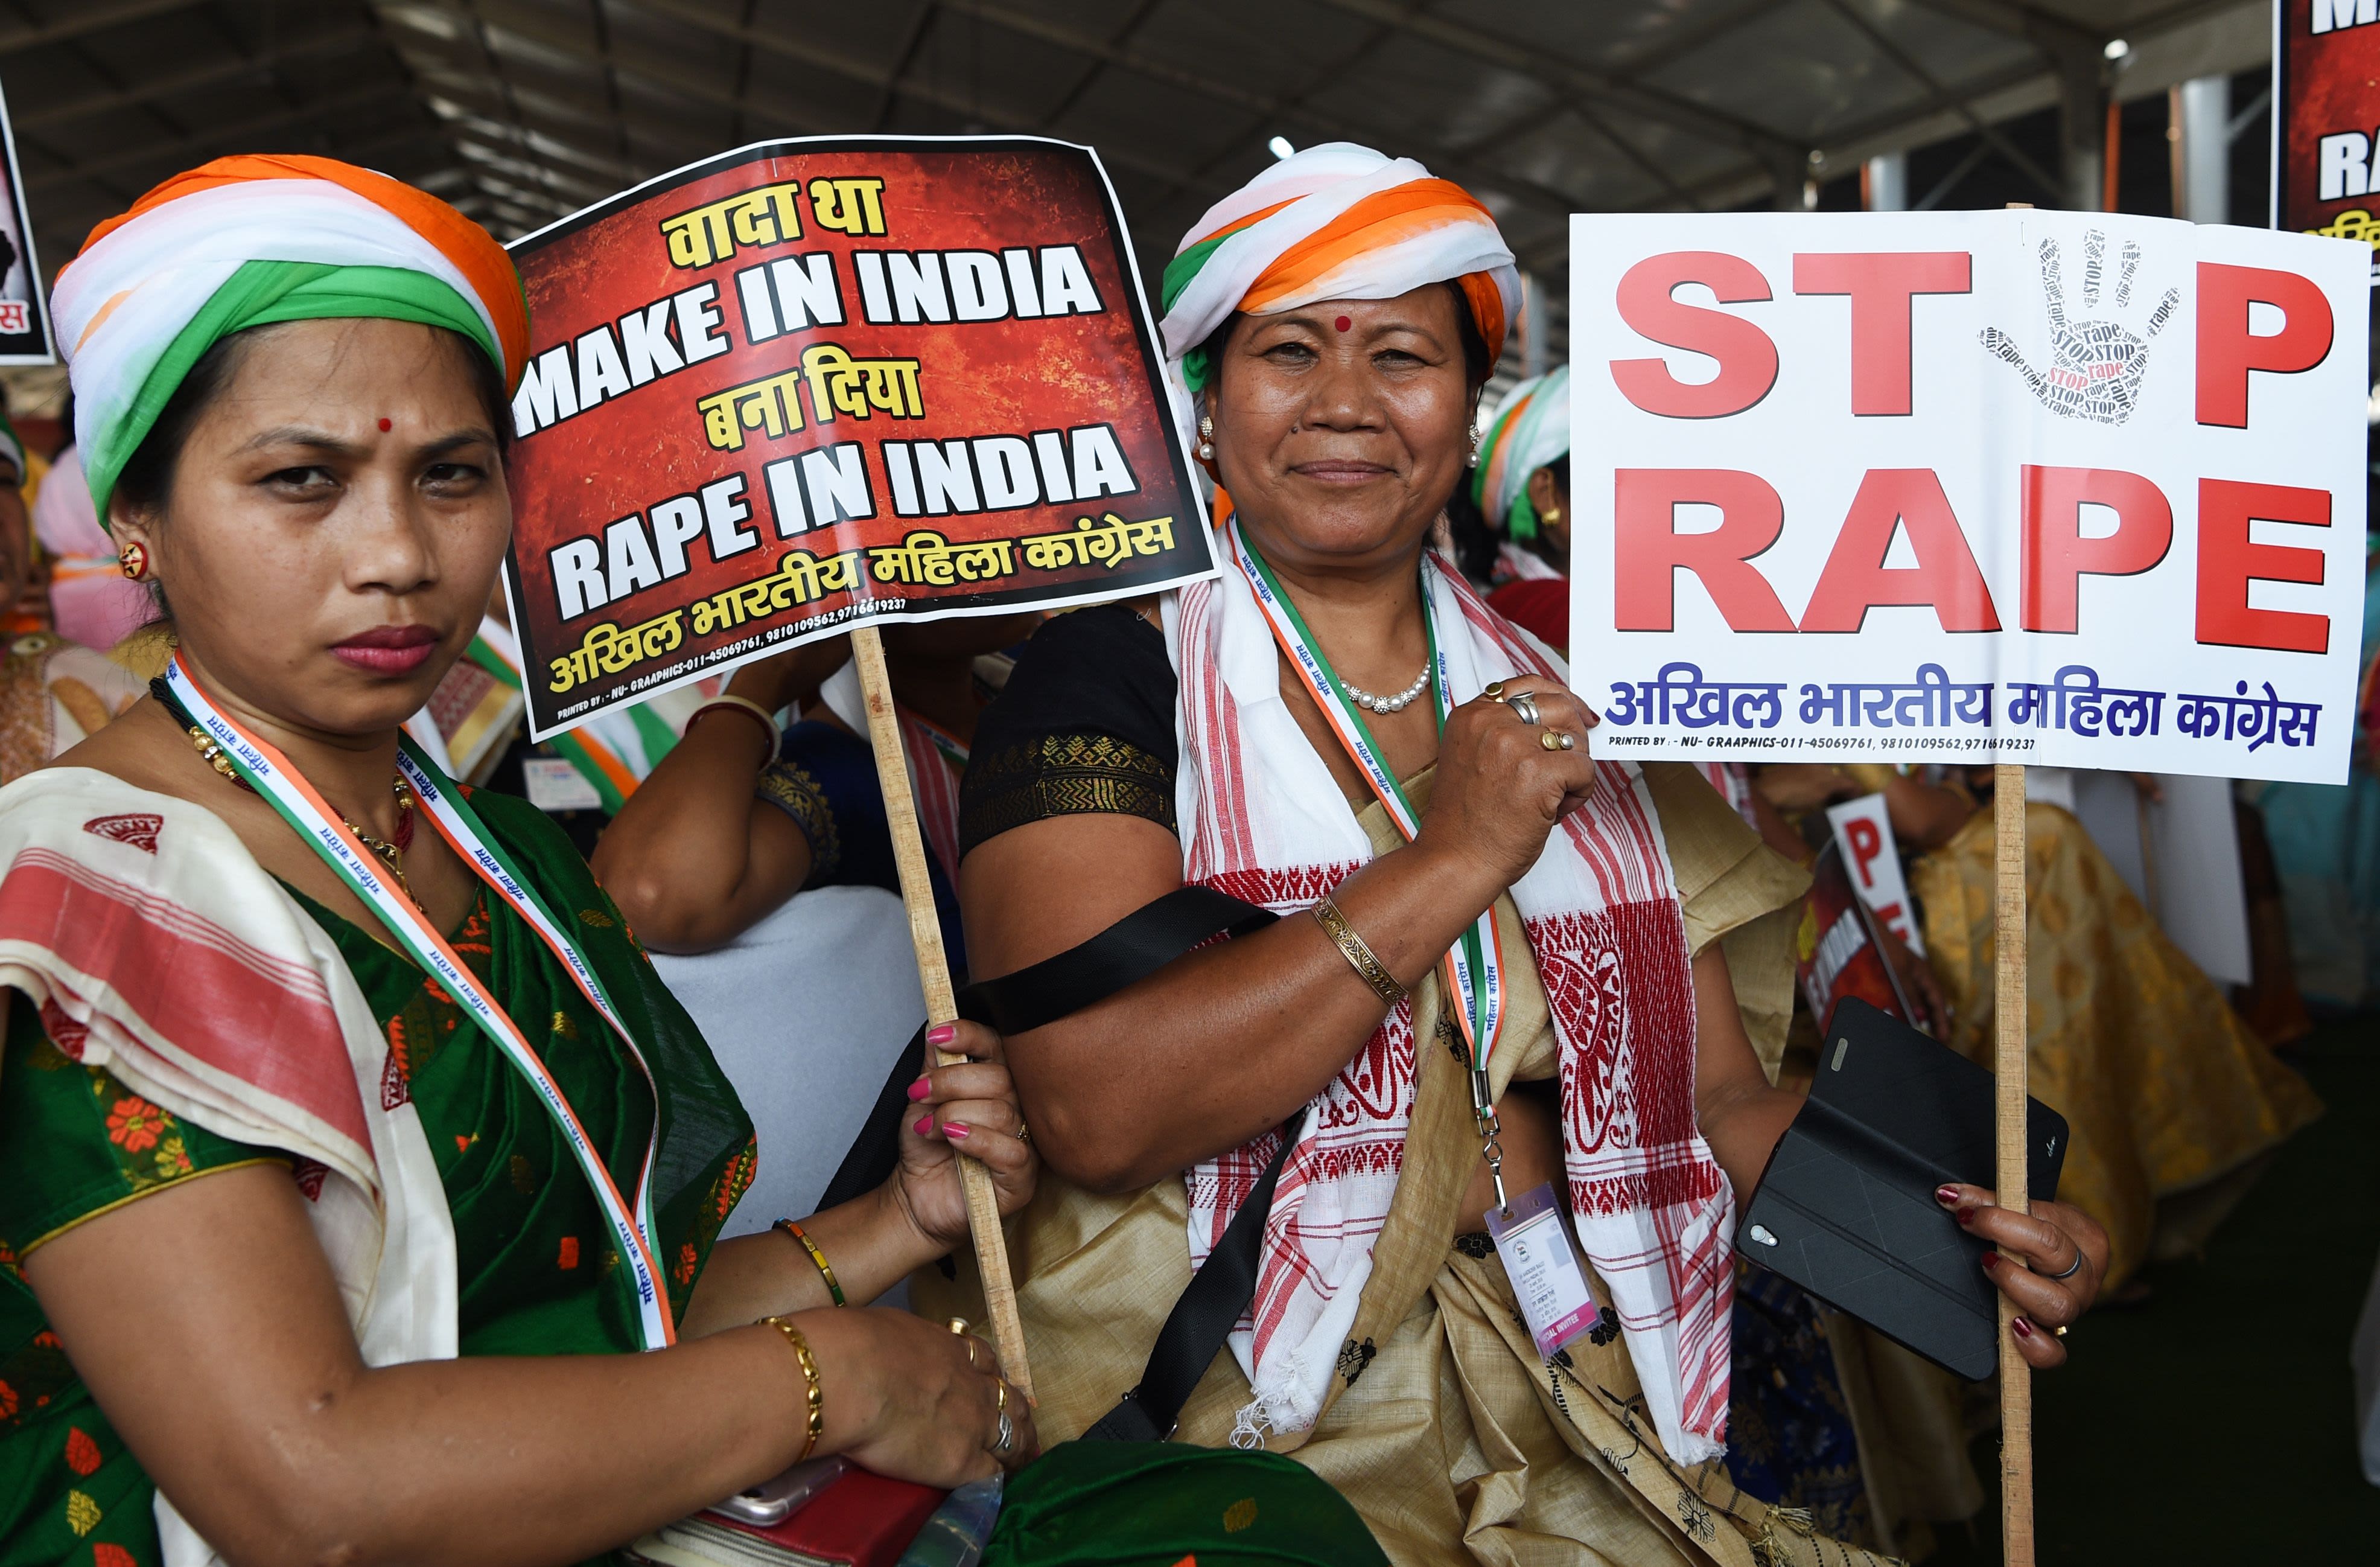 India launches sex offenders registry, amid spate of rape cases | CNN